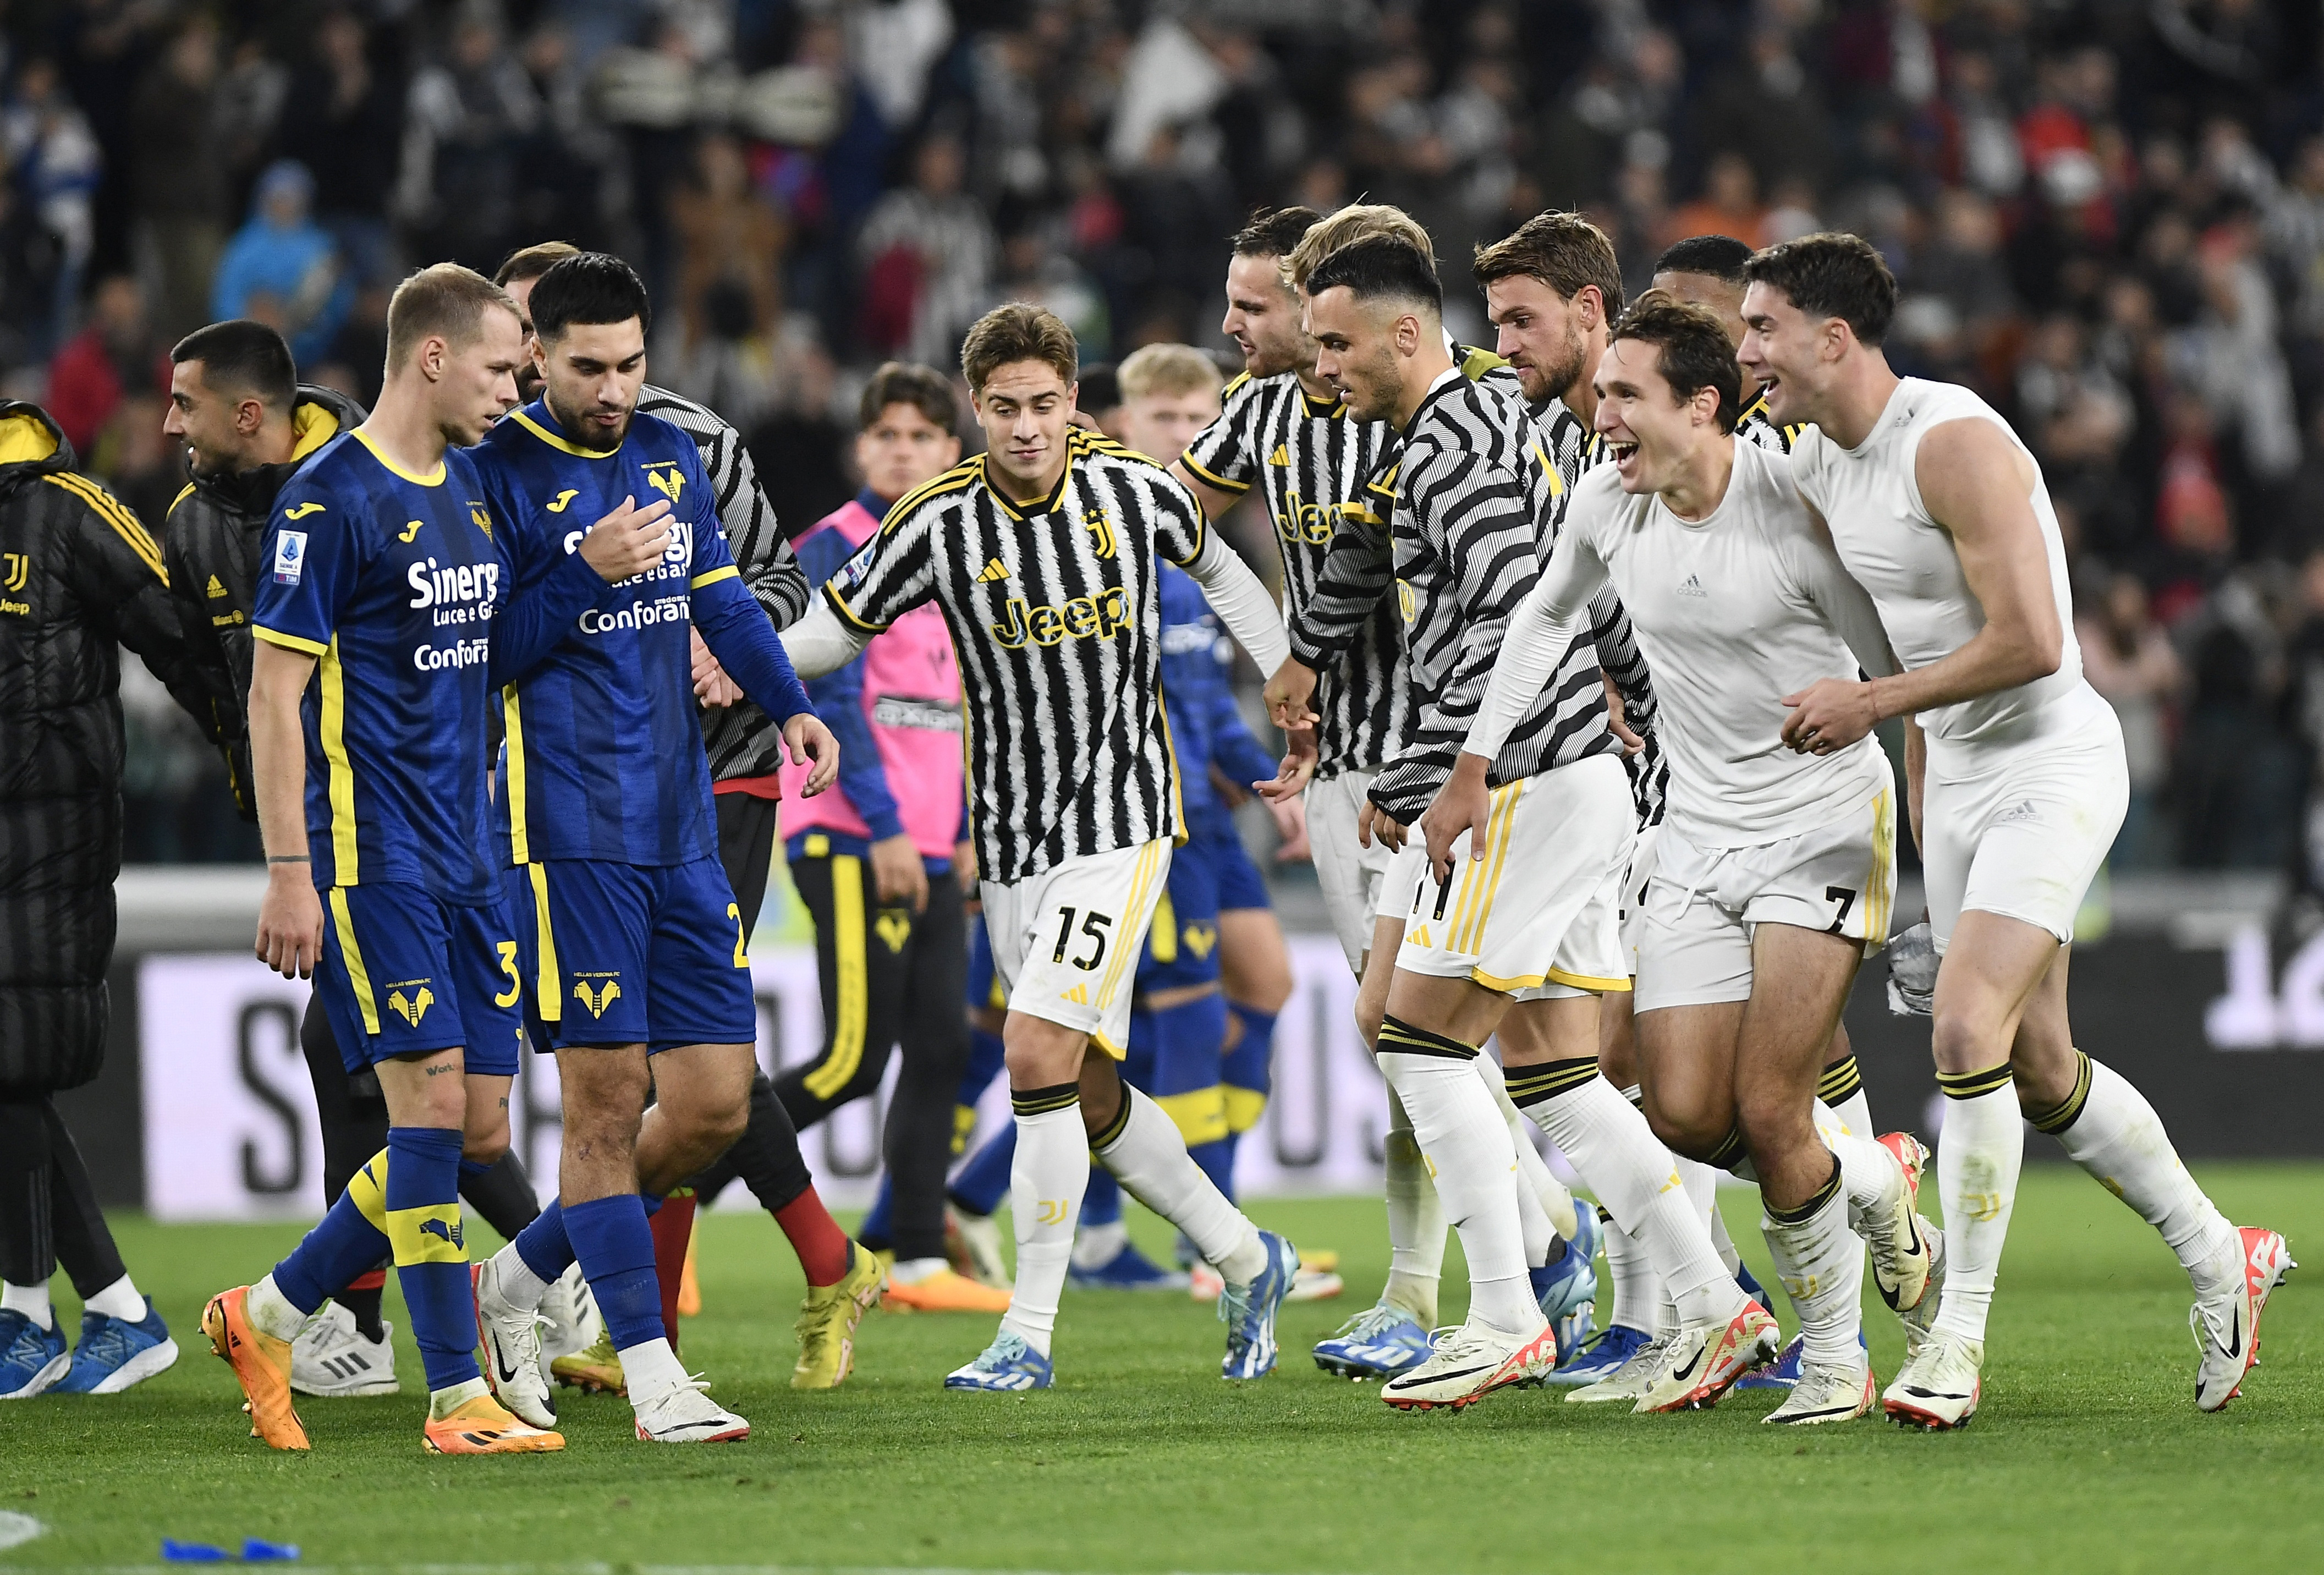 Wasteful Juve grab late win against Verona to top Serie A | Reuters